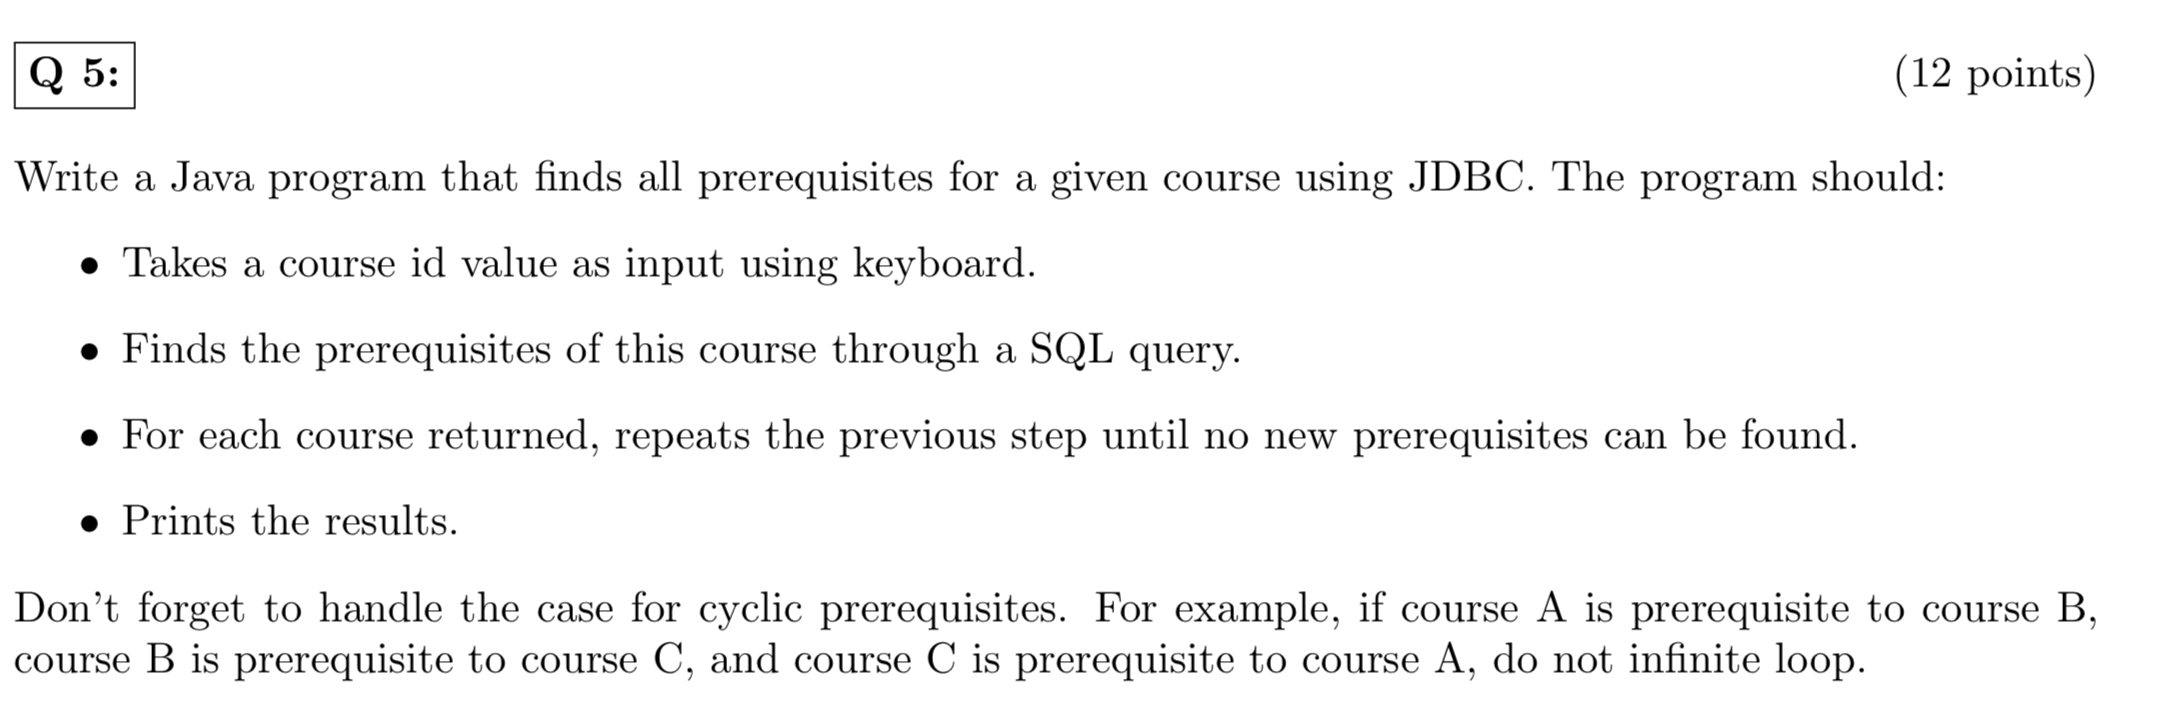 (12 points) Q 5: Write a Java program that finds all prerequisites for a given using JDBC. The program should: course input u